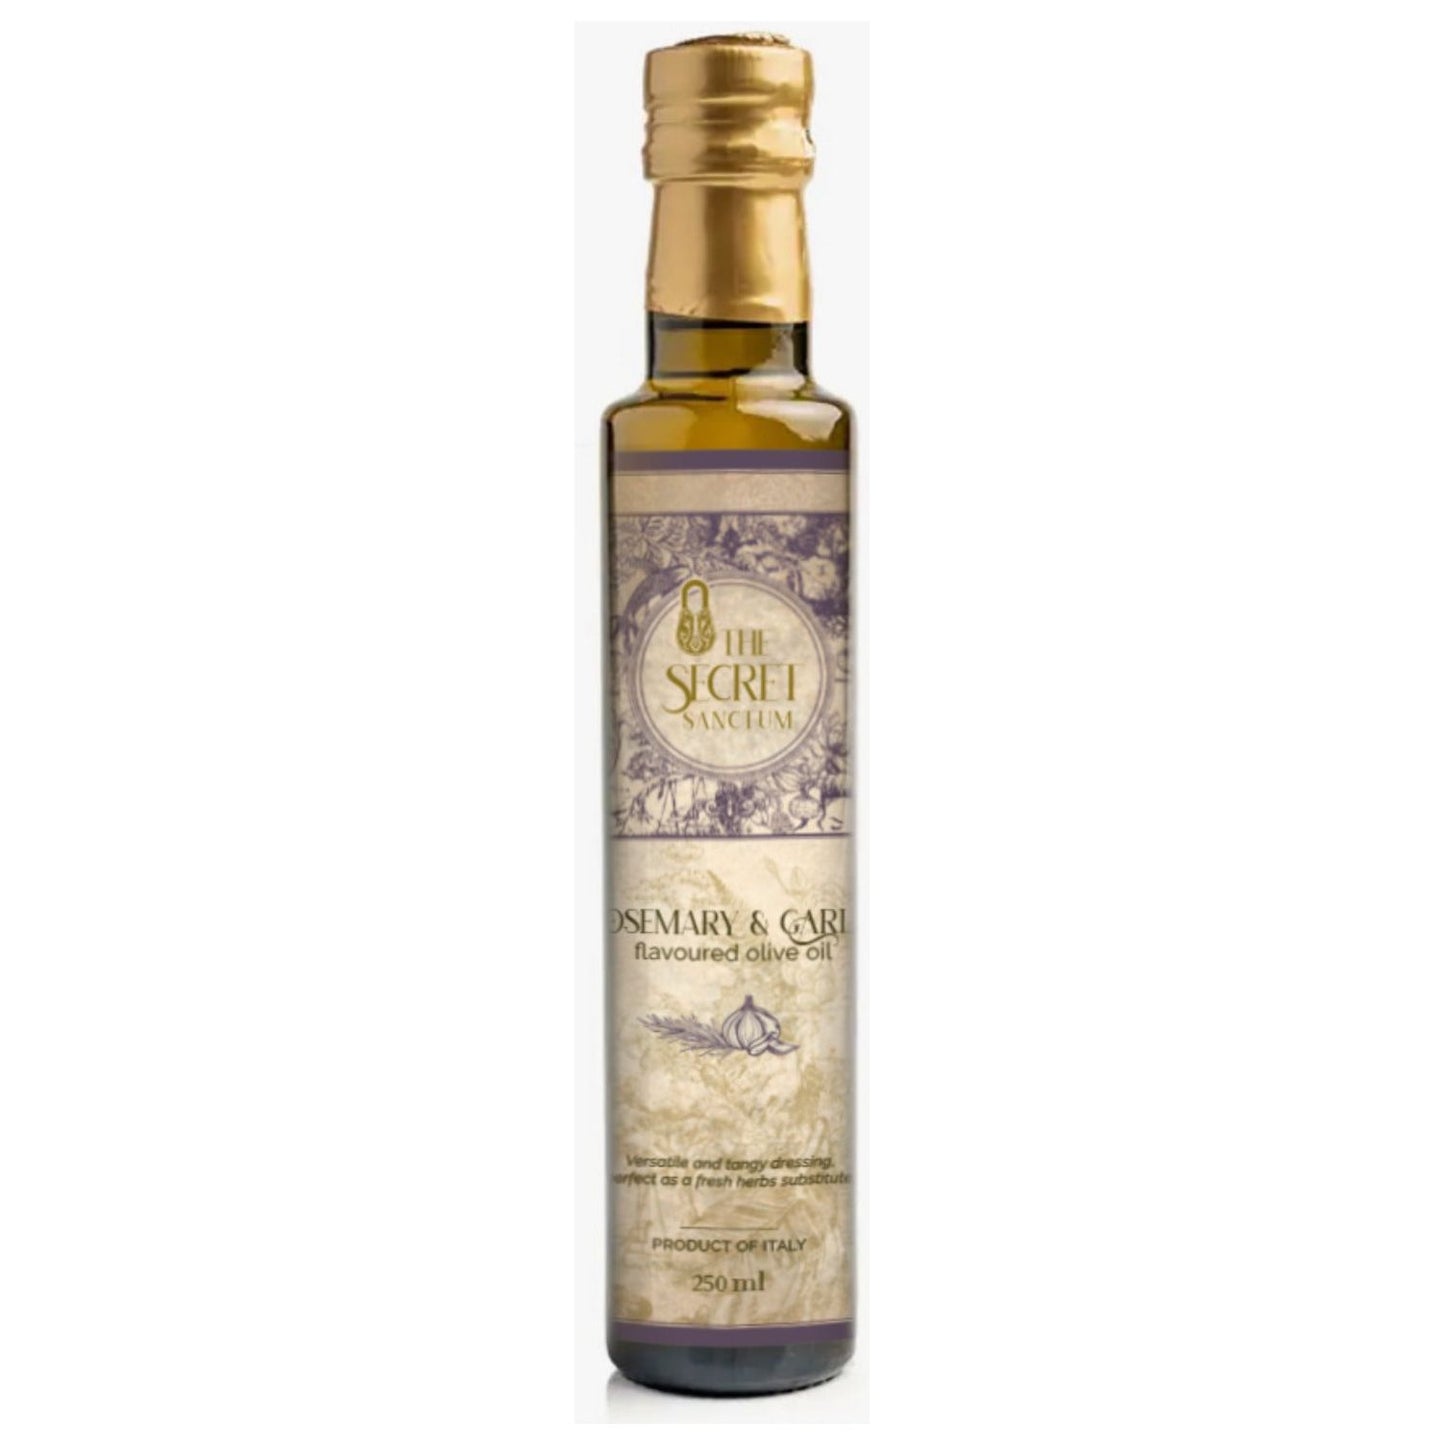 TSS ROSEMARY AND GARLIC flavoured olive oil 250 ml - Elegant